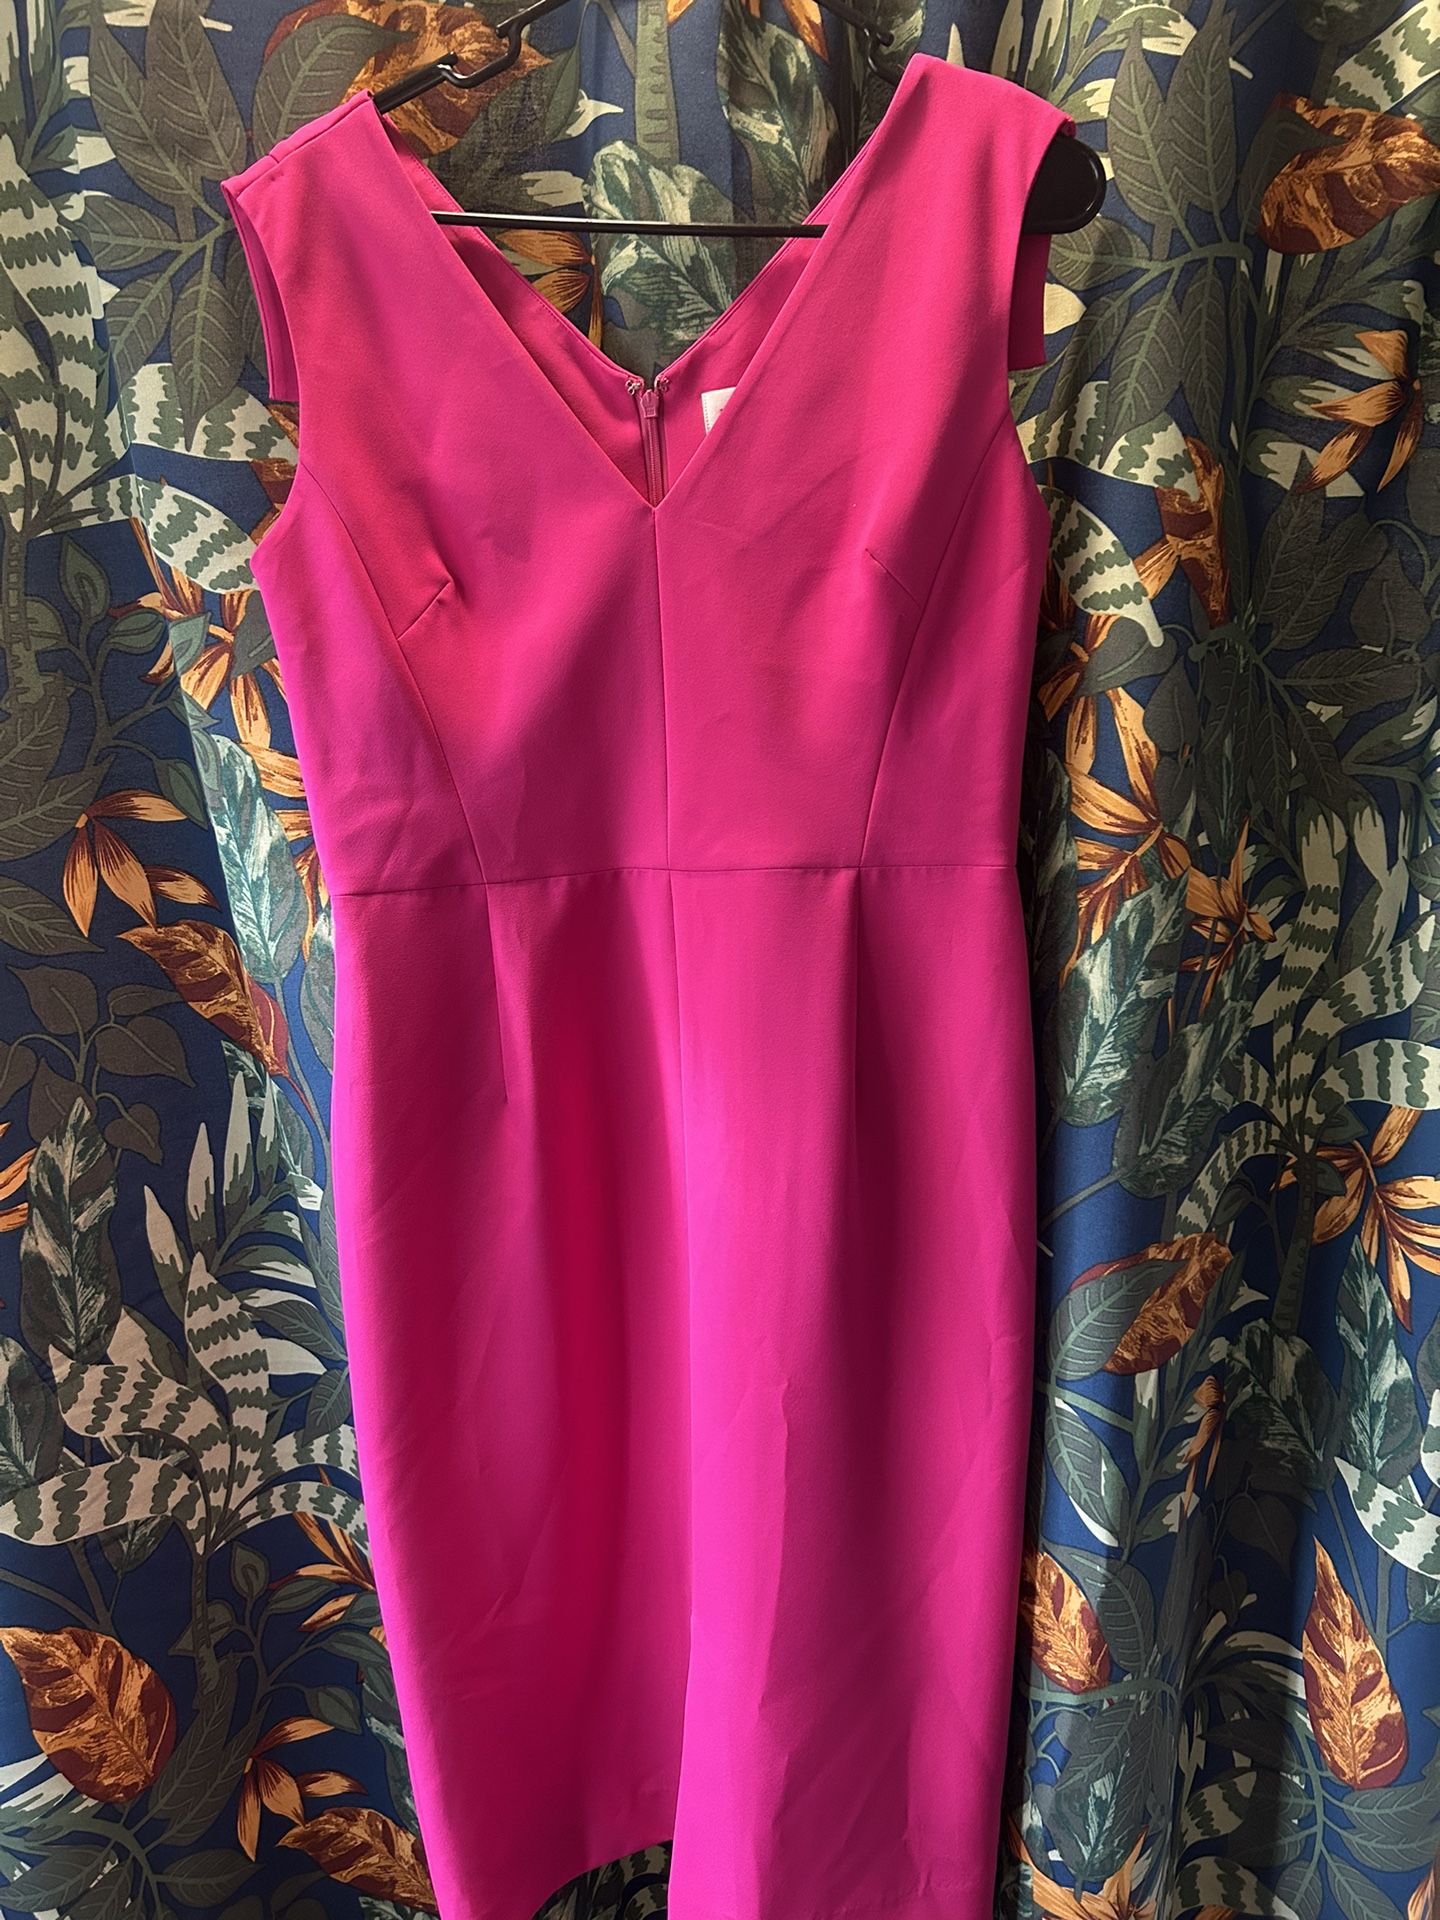 Milly Dress Hot Pink Size 8